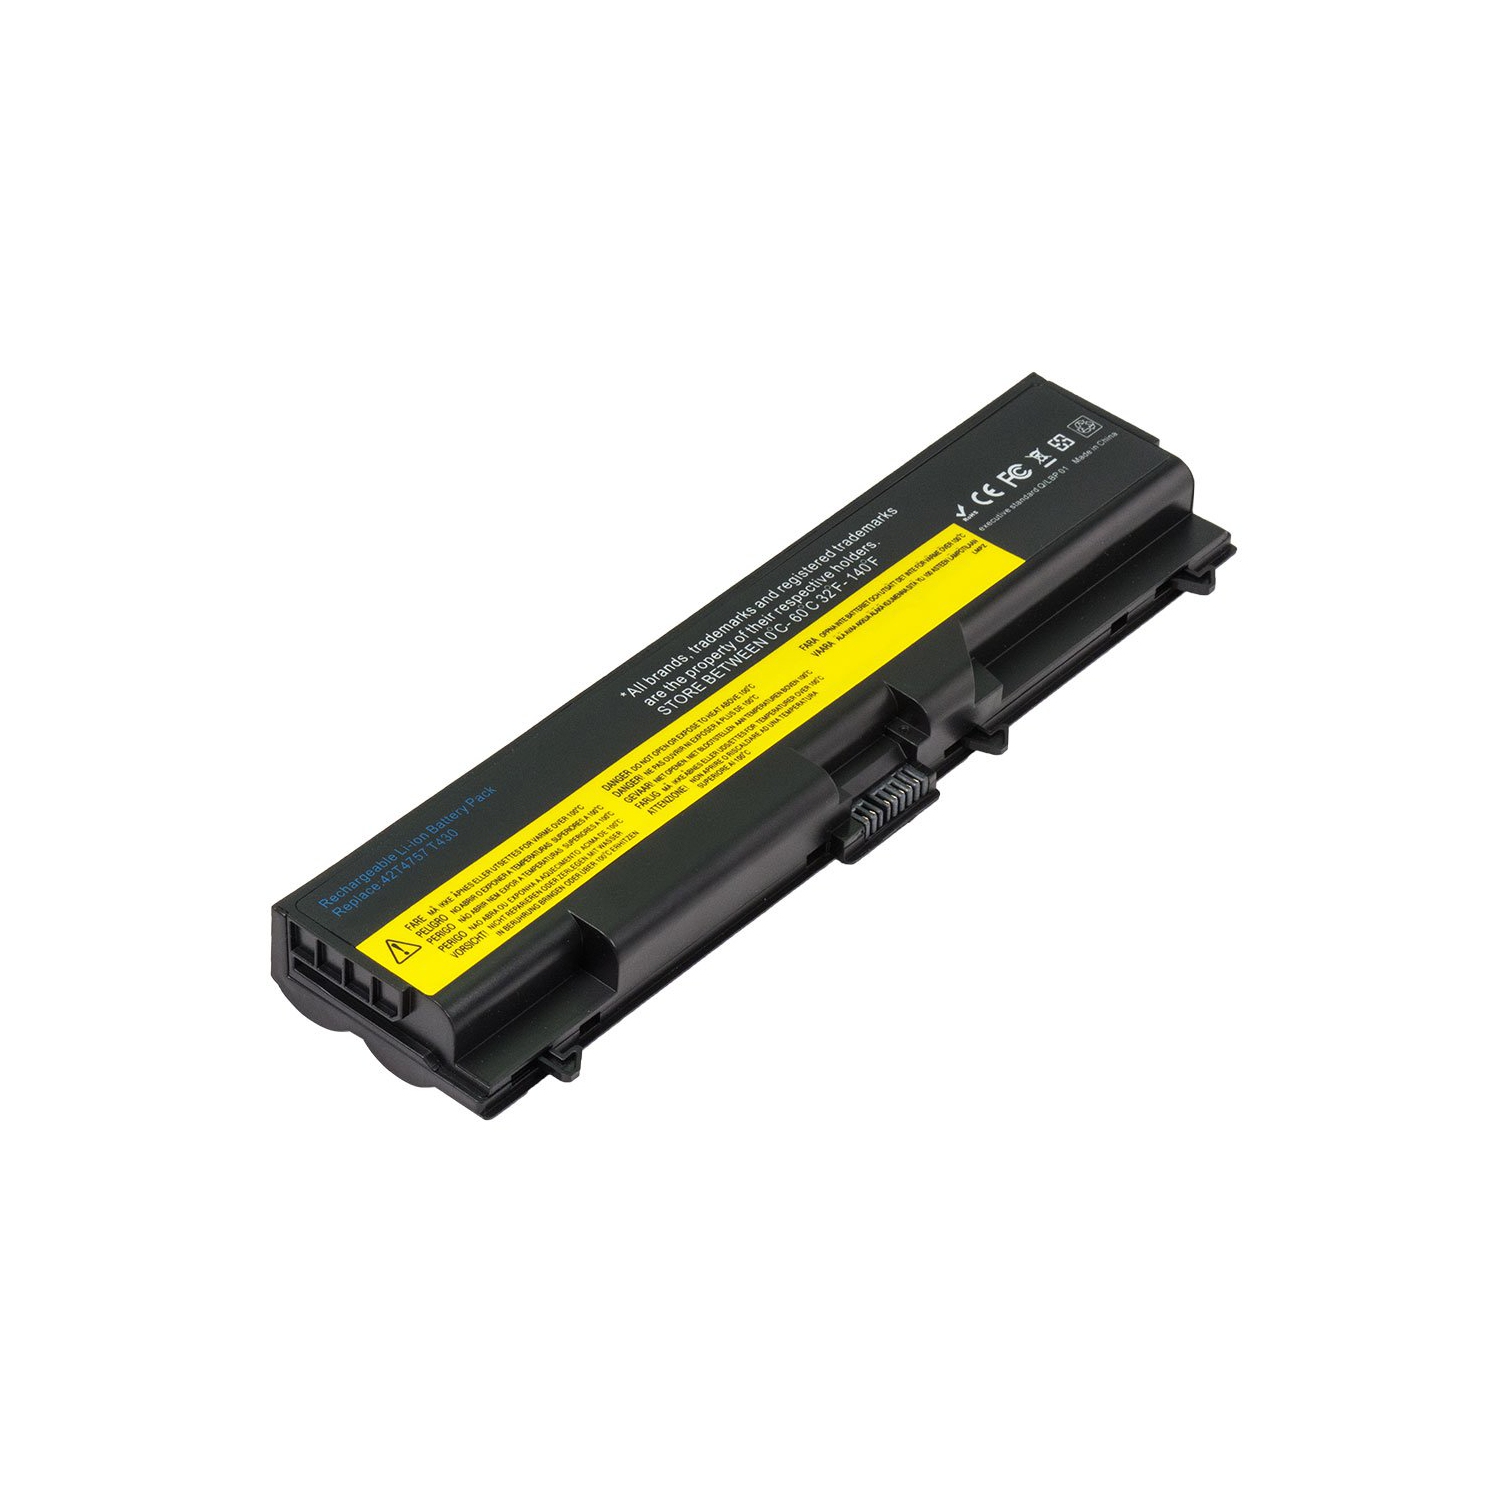 Laptop Battery Replacement for Lenovo ThinkPad W530 2438, 42T4712, 42T4737, 42T4763, 42T4797, 42T4921, 0A36303